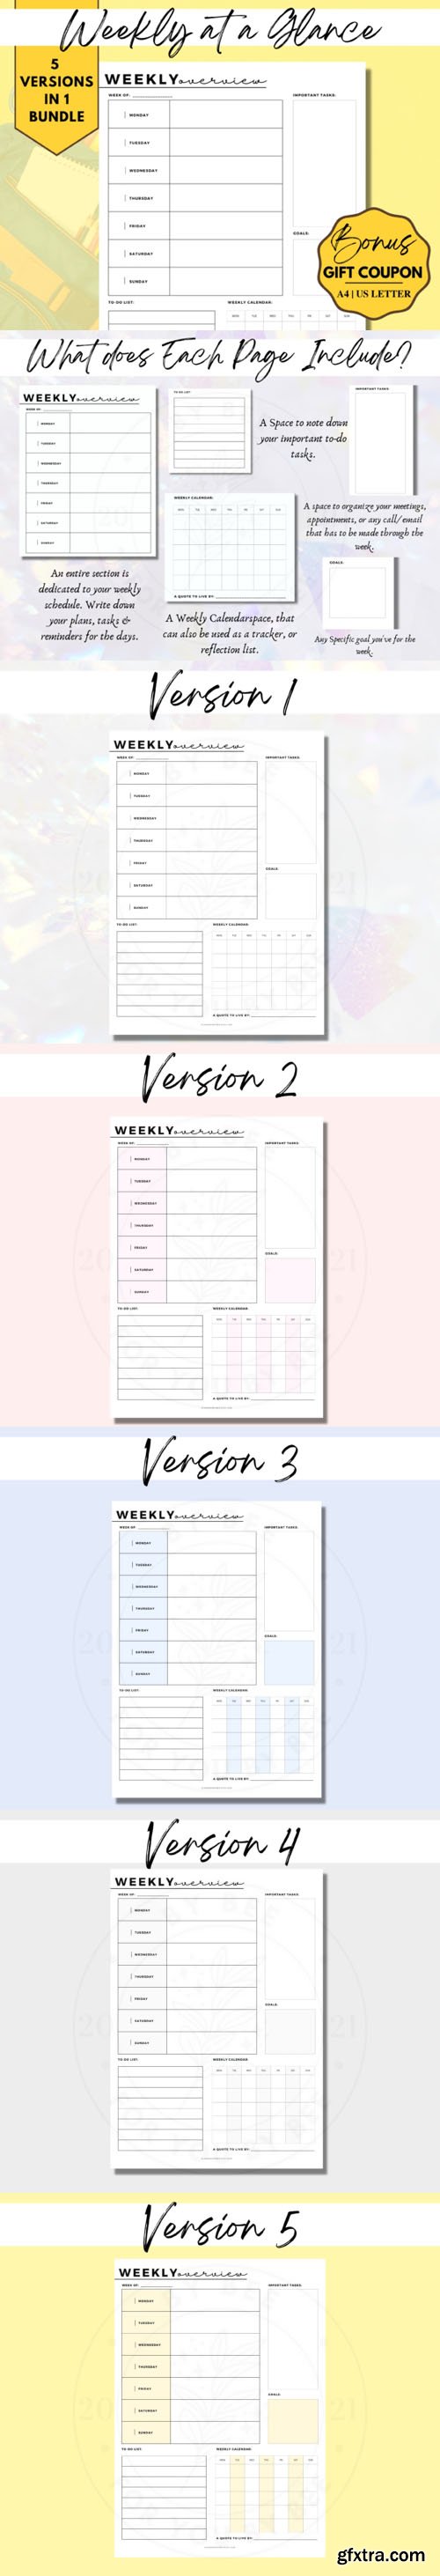 Weekly at a Glance - Weekly Planner Templates